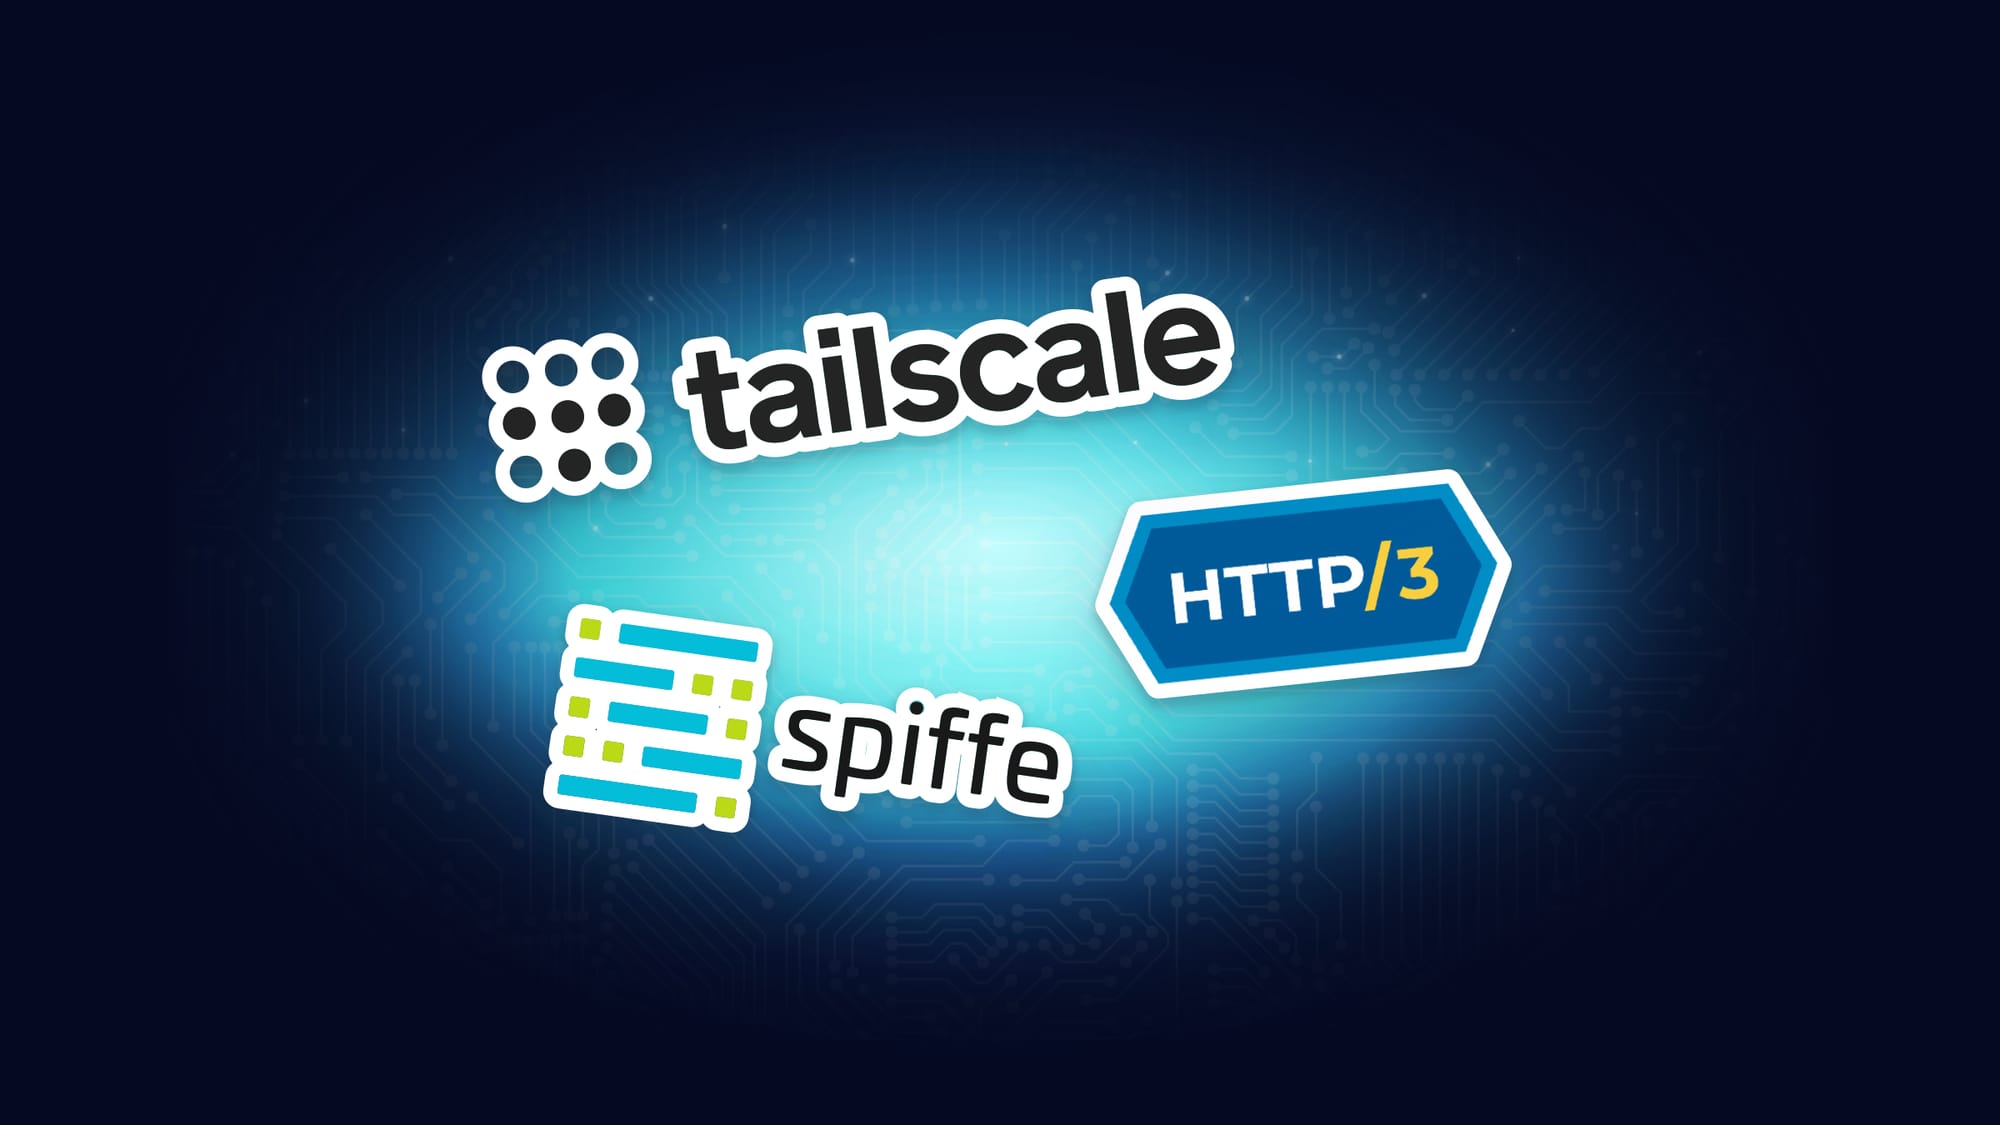 Traefik 3.0 with SPIFFE, Tailscale & HTTP/3